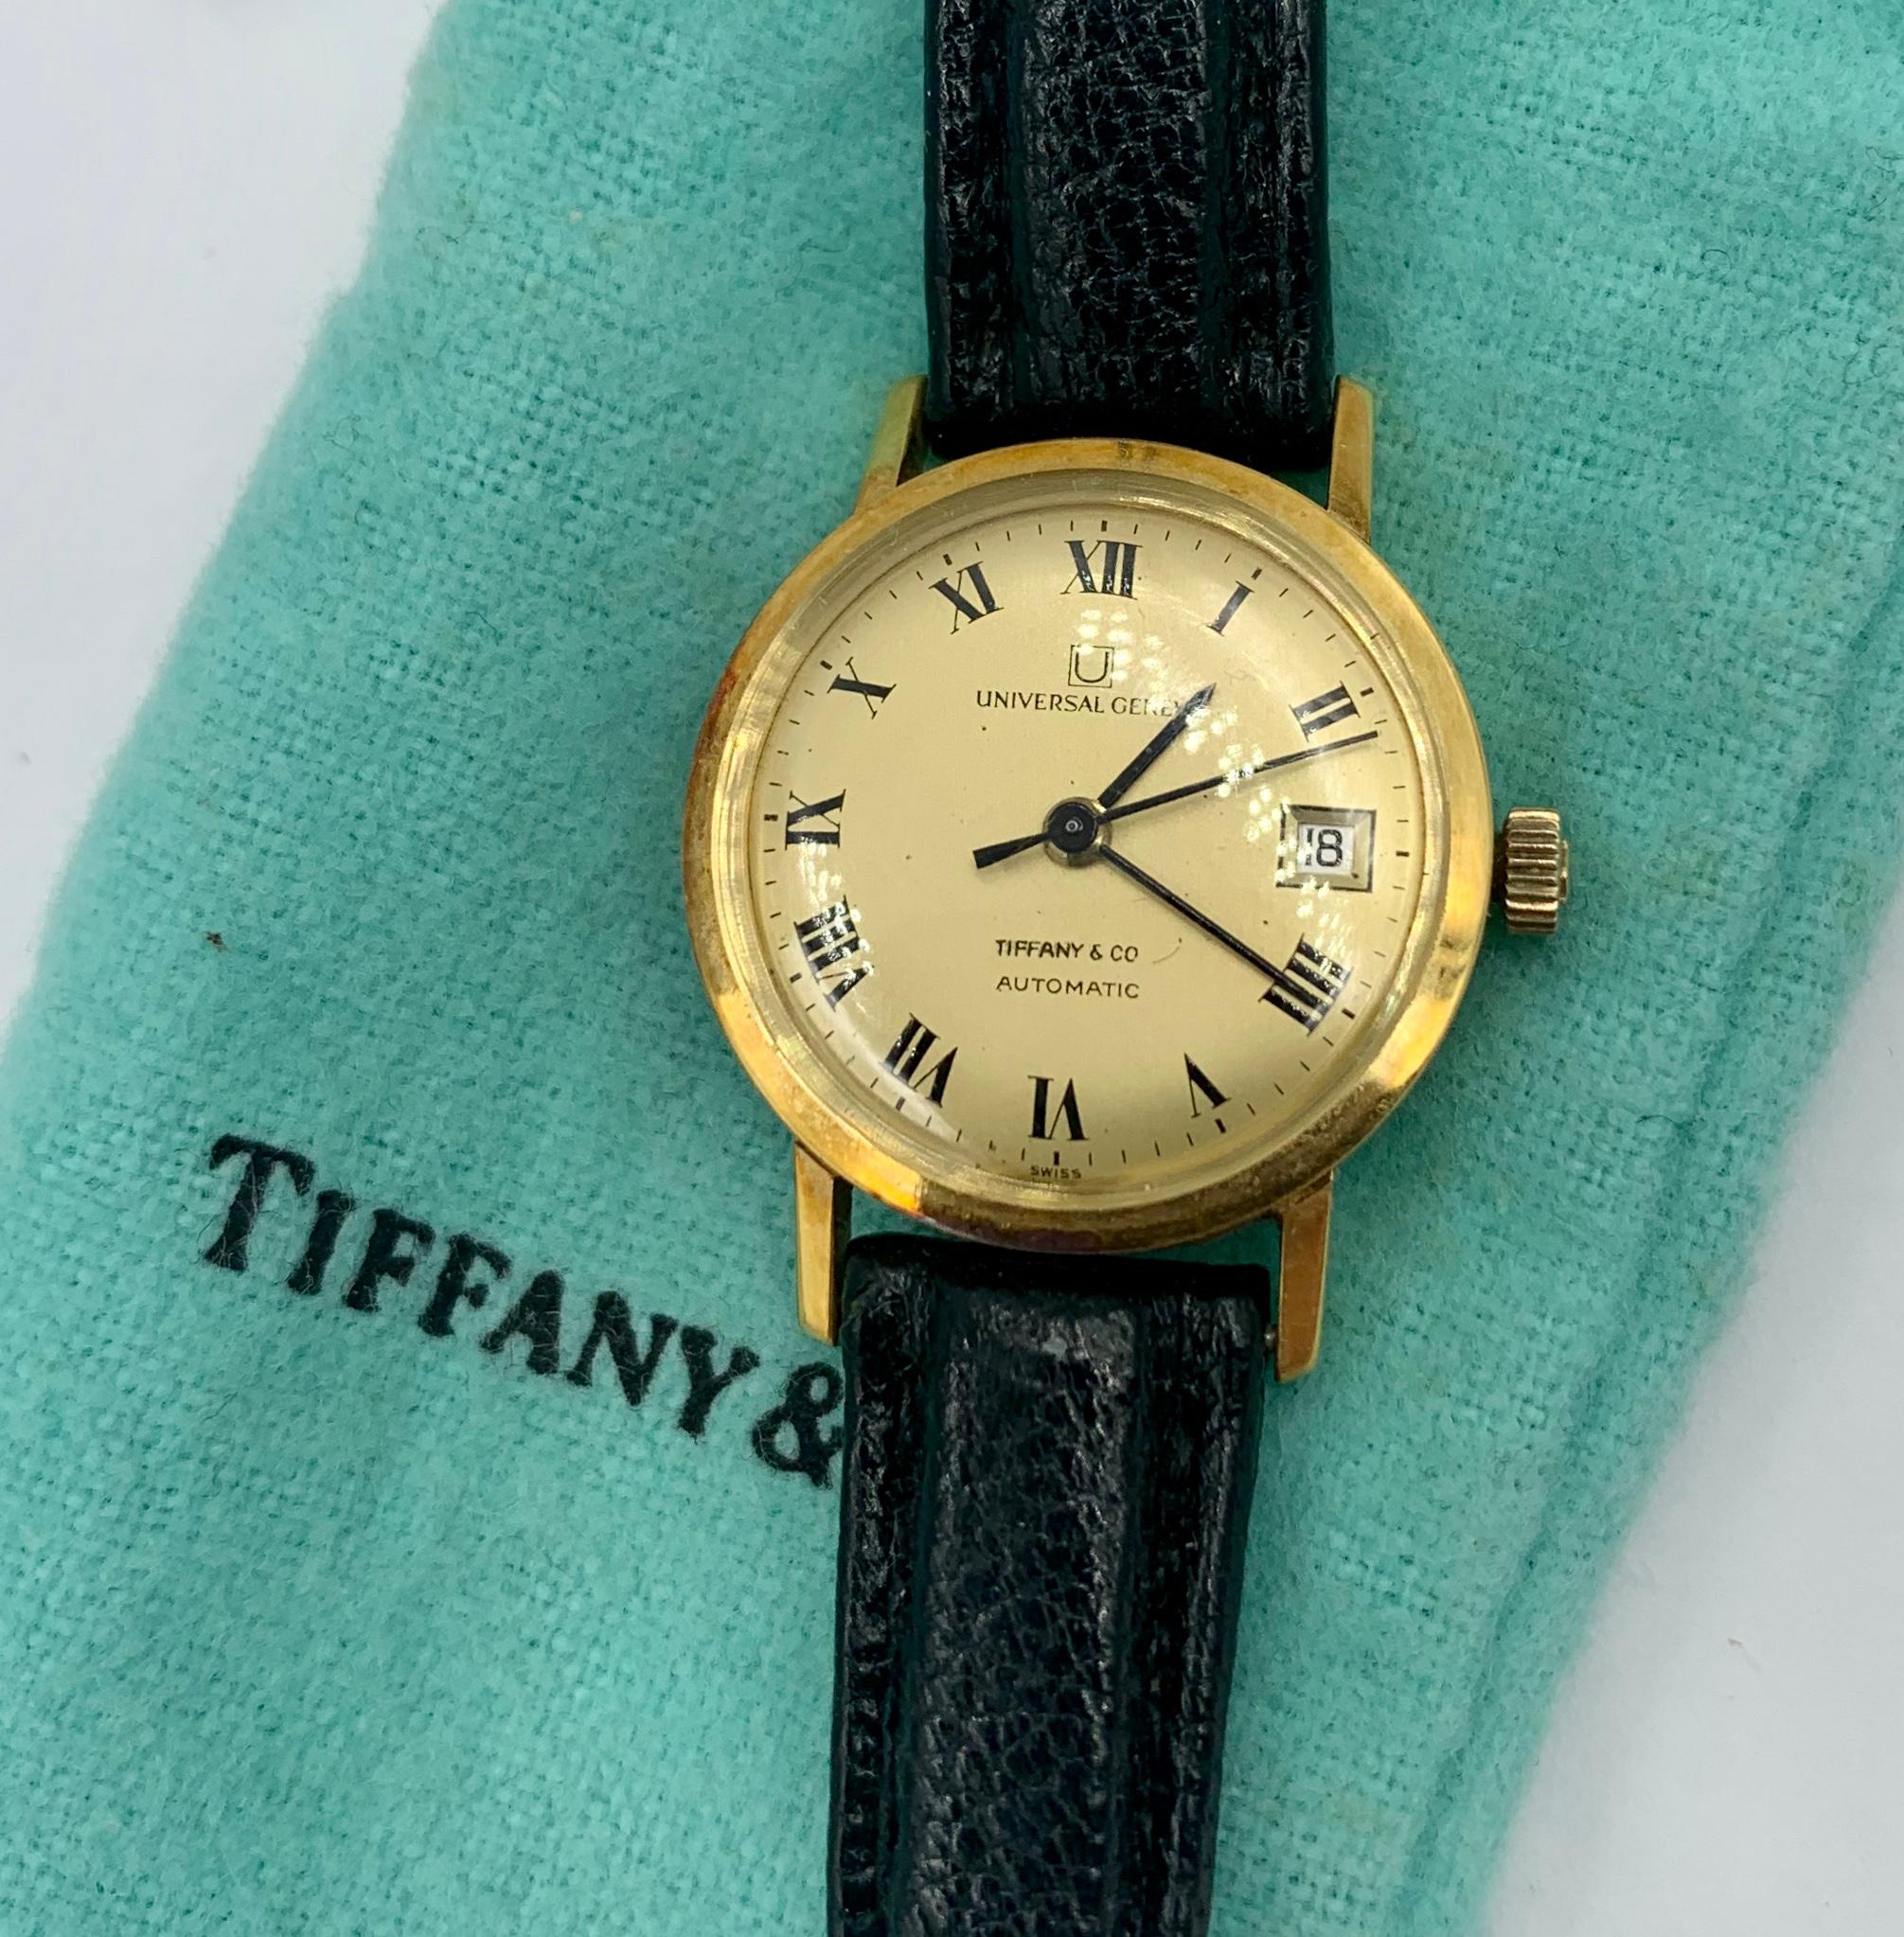 This is a gorgeous Tiffany & Co Universal Geneve Ladies Wristwatch in 18 Karat Yellow Gold.  The watch is in fine working order.  The wonderful 